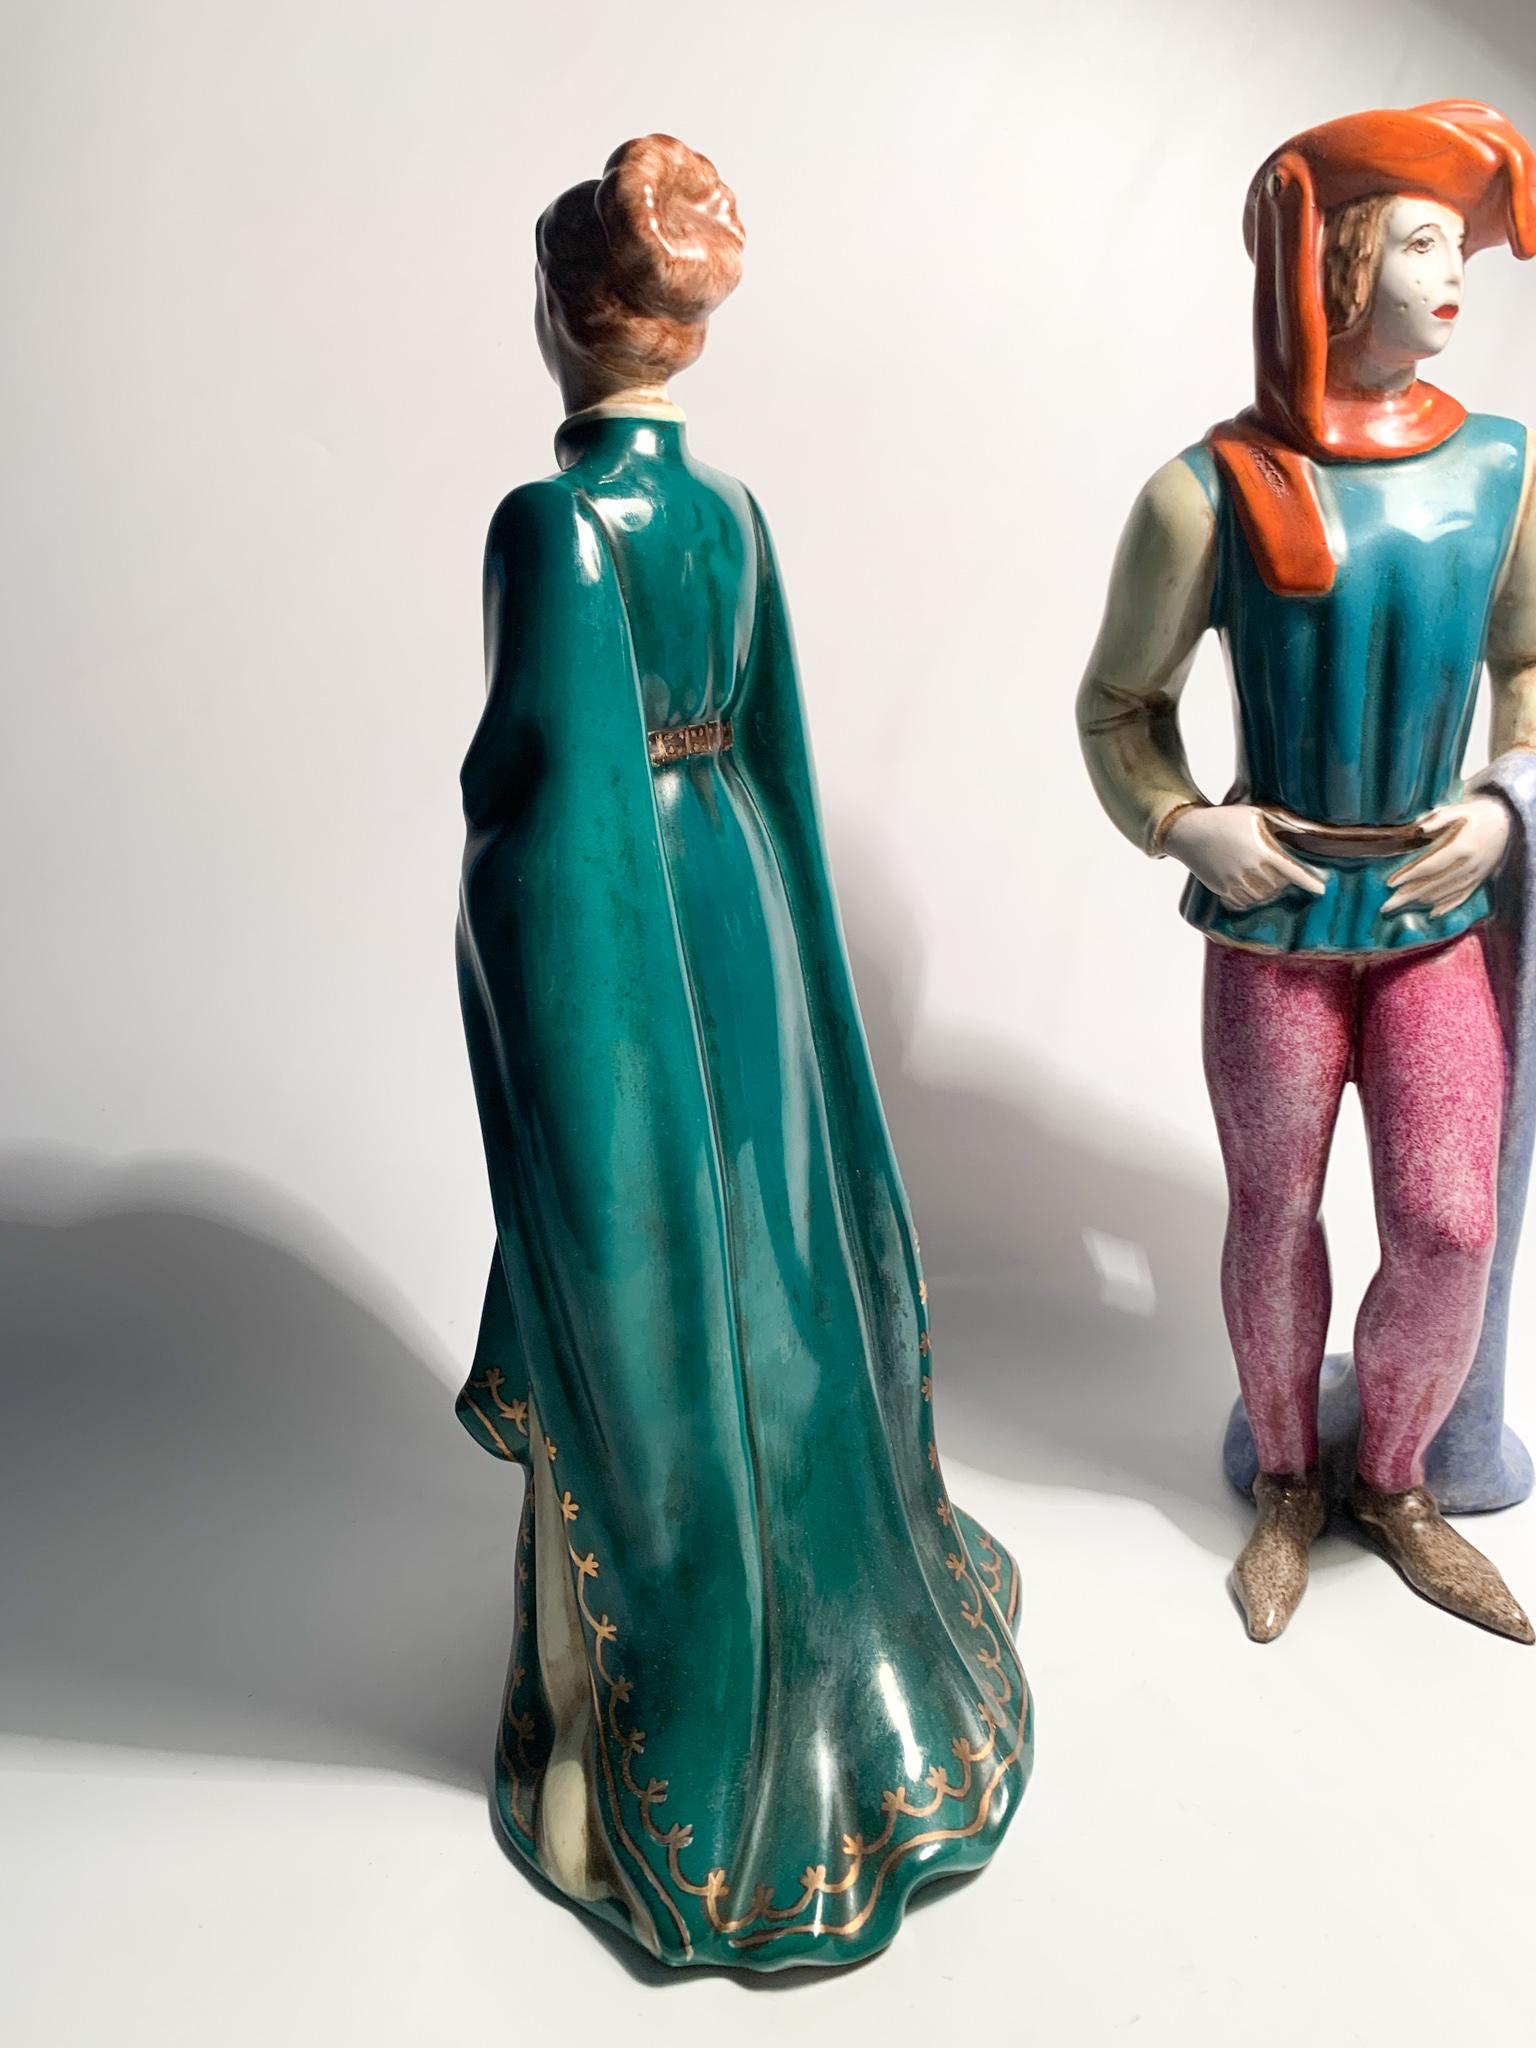 Pair of Statues of a Lady and a Gentleman in Ceramic by Zaccagnini 1940 For Sale 4